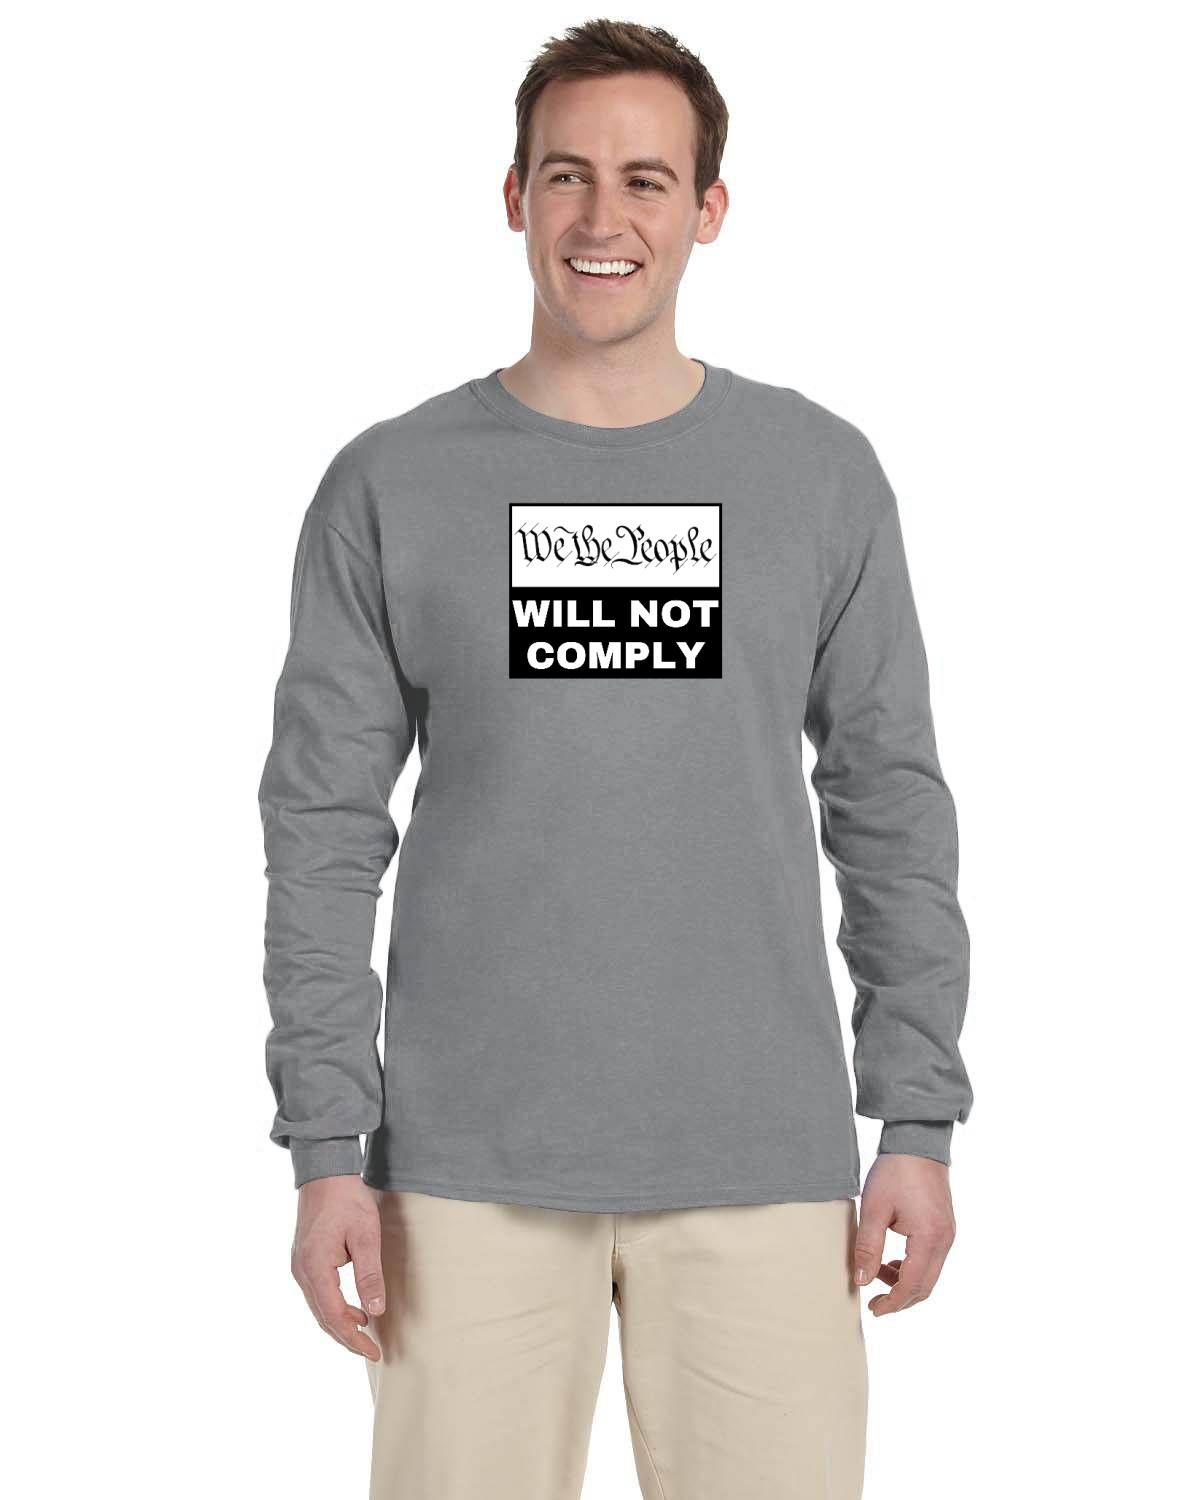 We The People Will Not Comply. Long-Sleeve T-Shirt